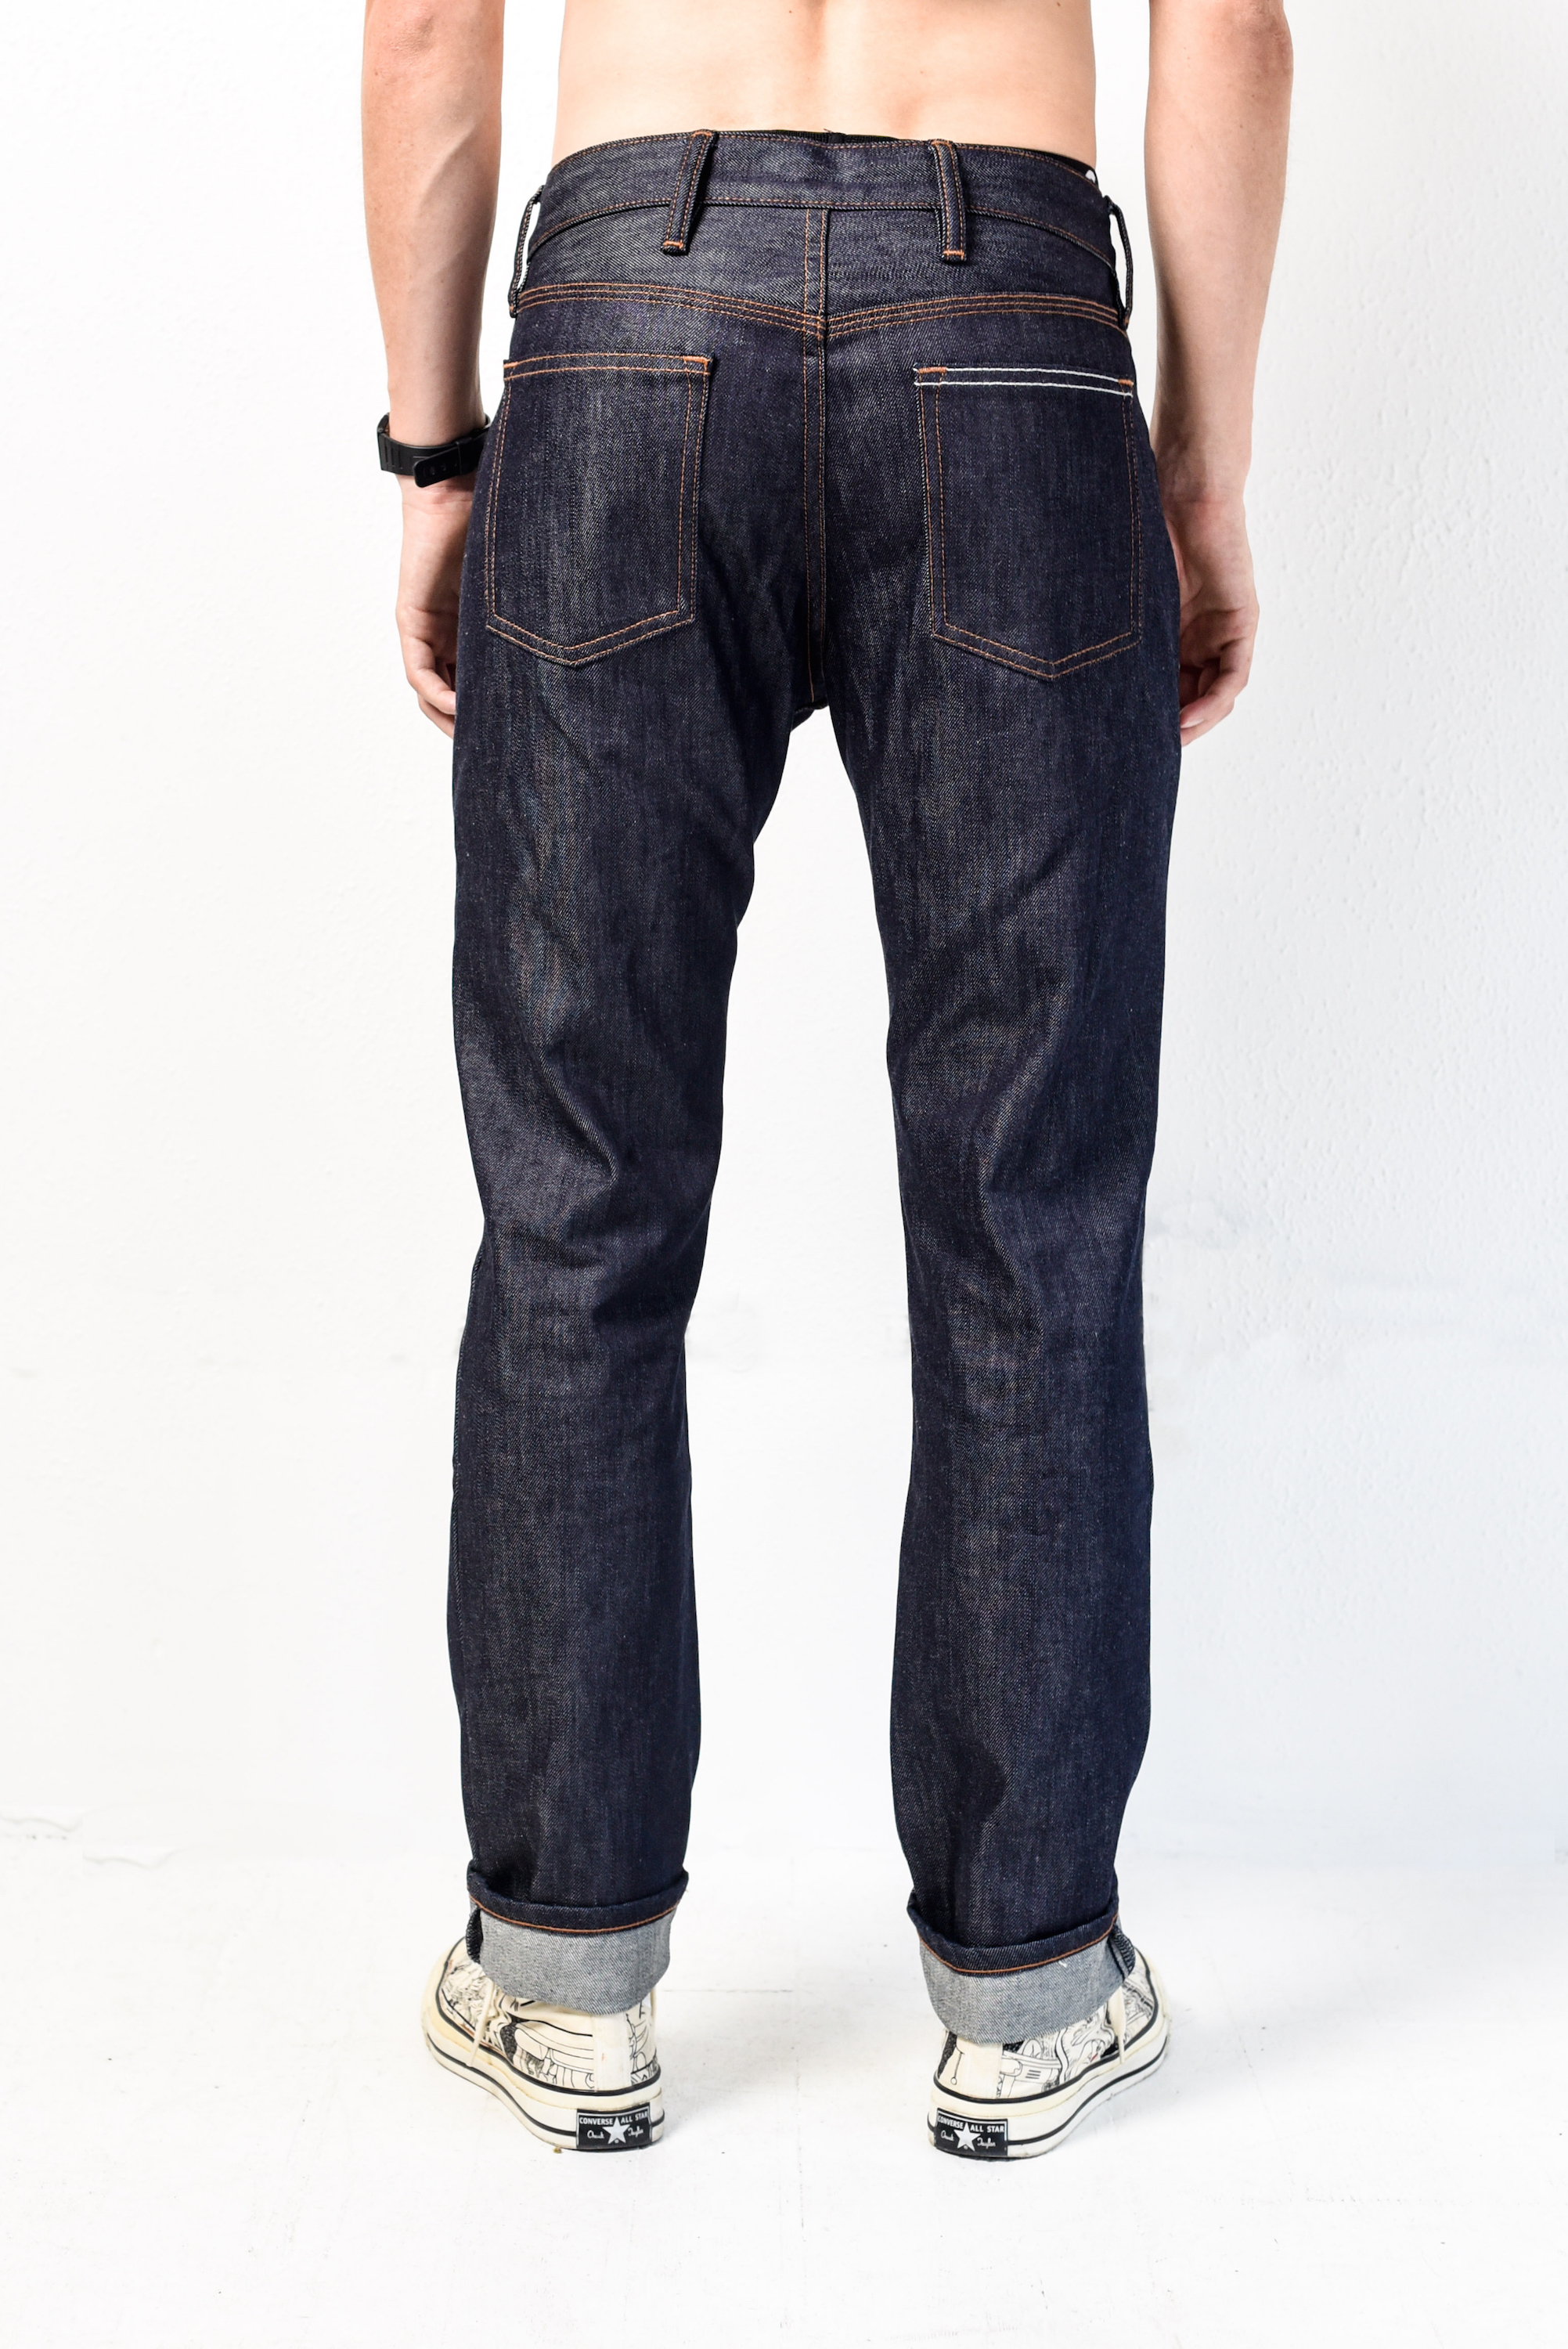 Mens SOURCE Denim Ethical Raw Jeans